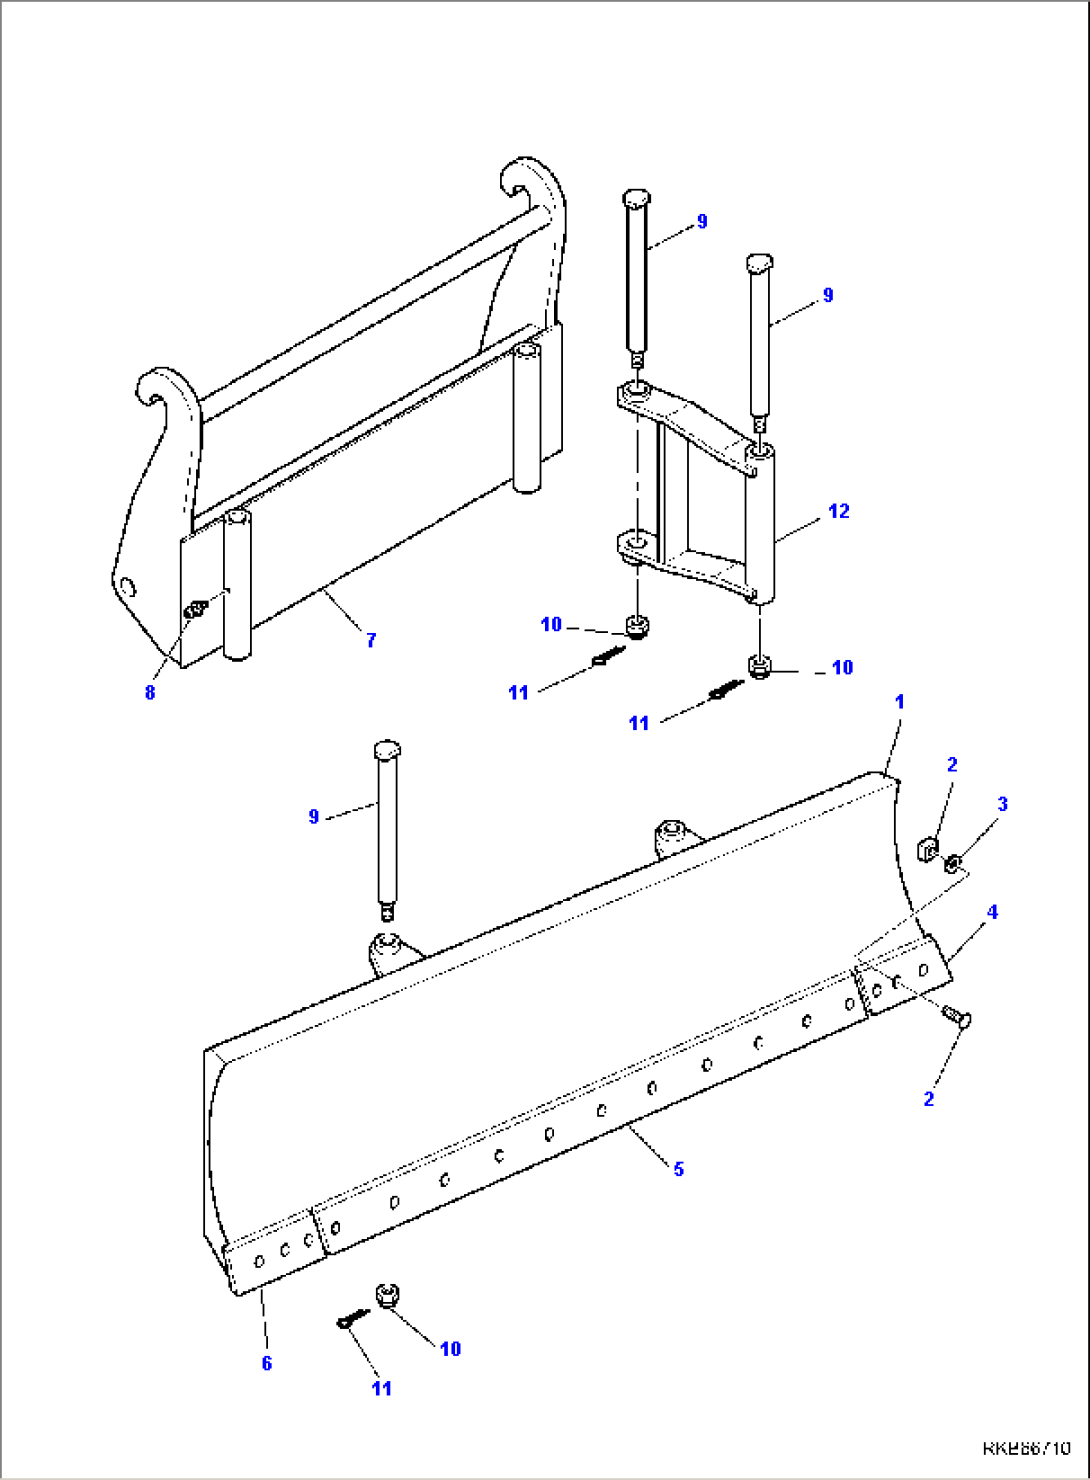 BLADE (WITH HYDRAULIC QUICK COUPLING)